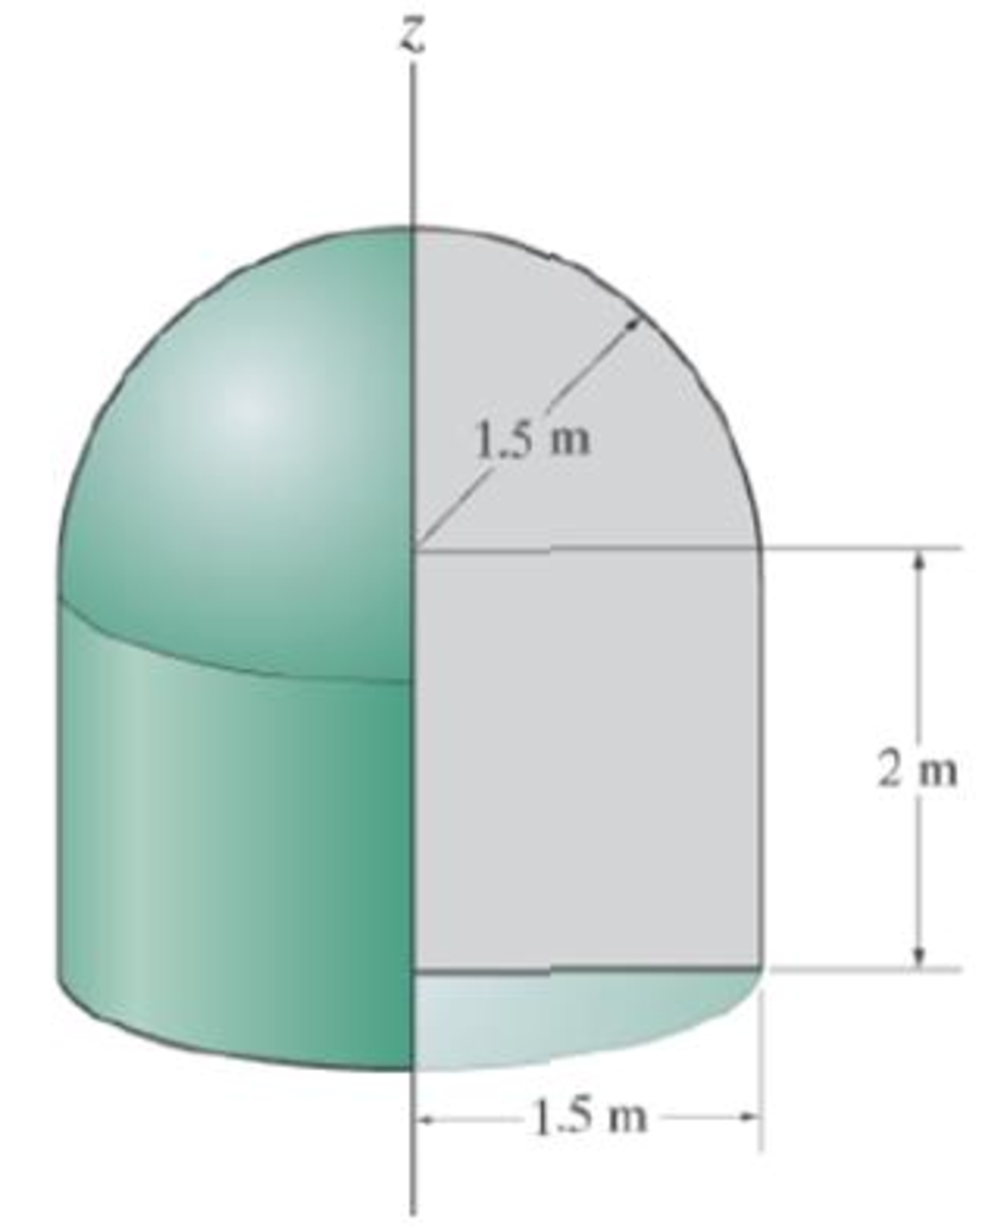 Chapter 9.3, Problem 16FP, Determine the surface area and volume of the solid formed by revolving the shaded area 360 about the 